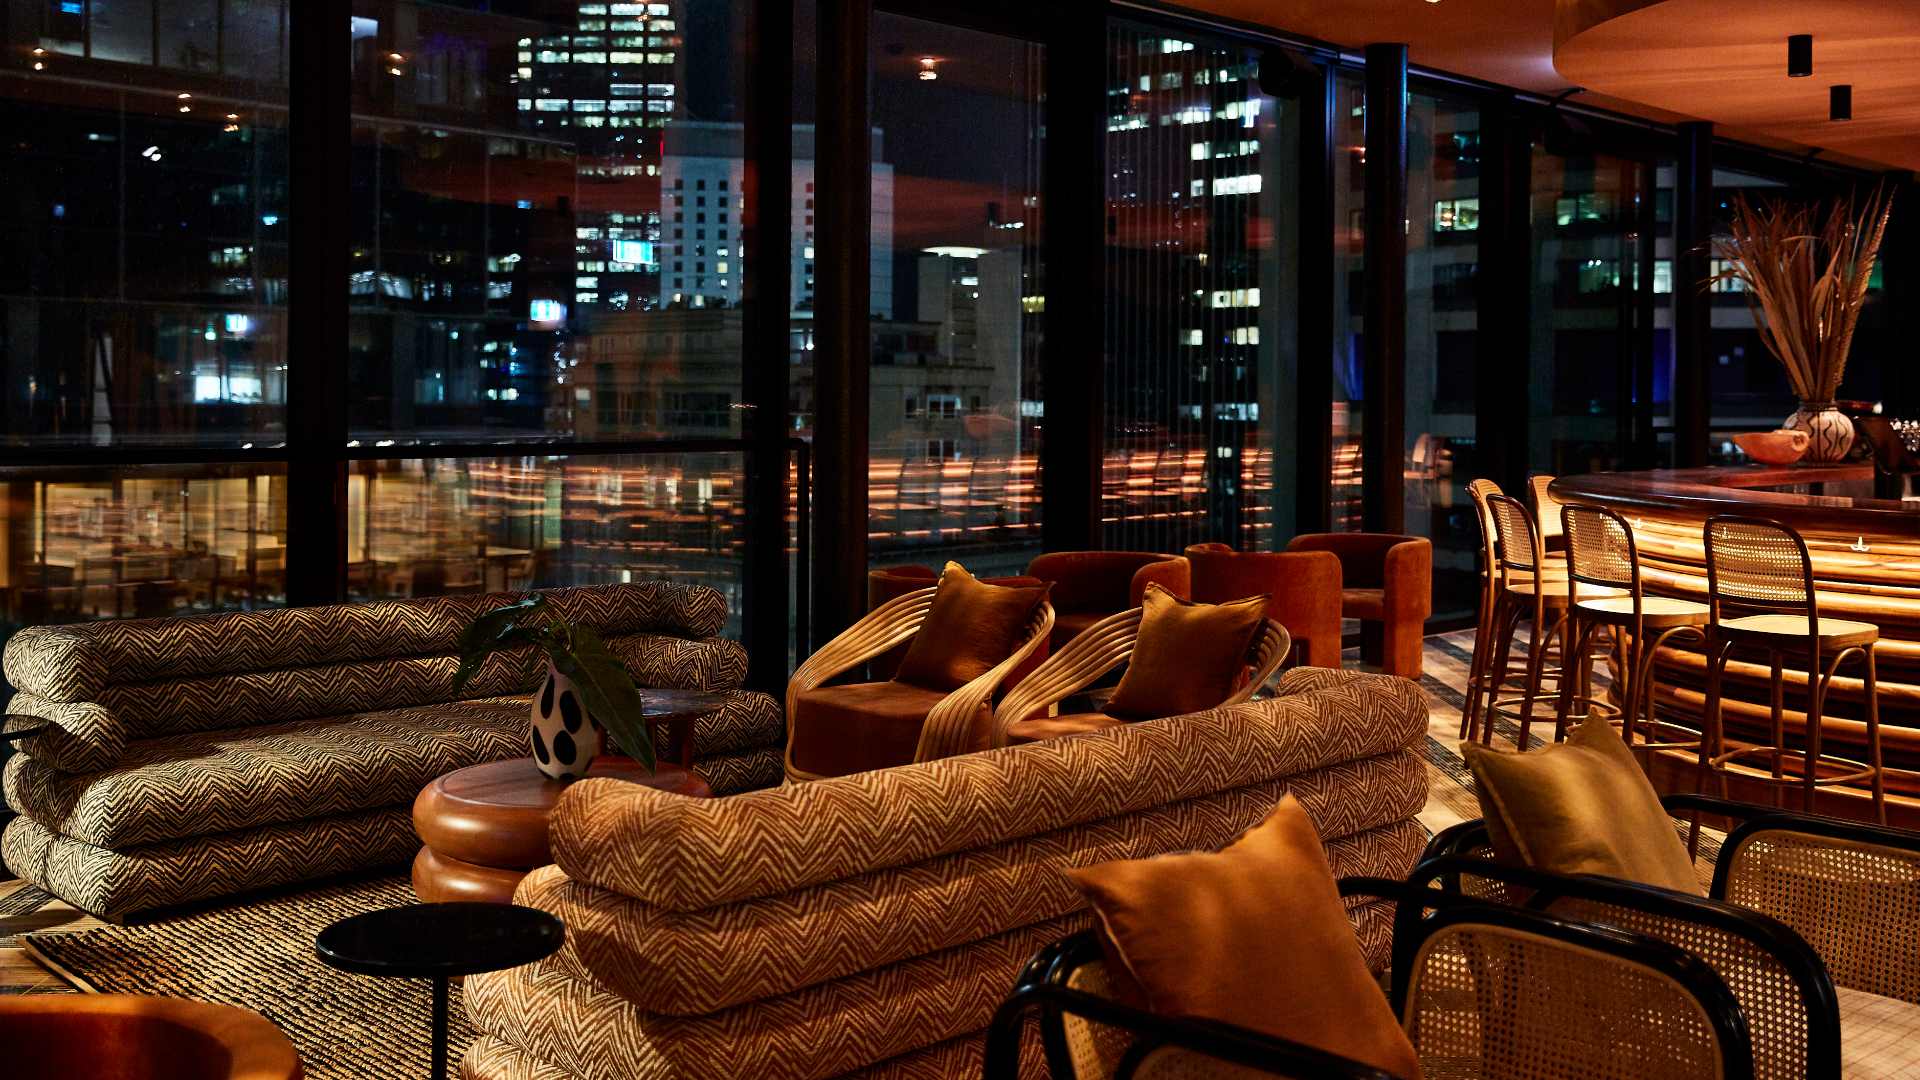 Two New Sky-High Bars Have Opened Inside Sydney's Historic Shell House